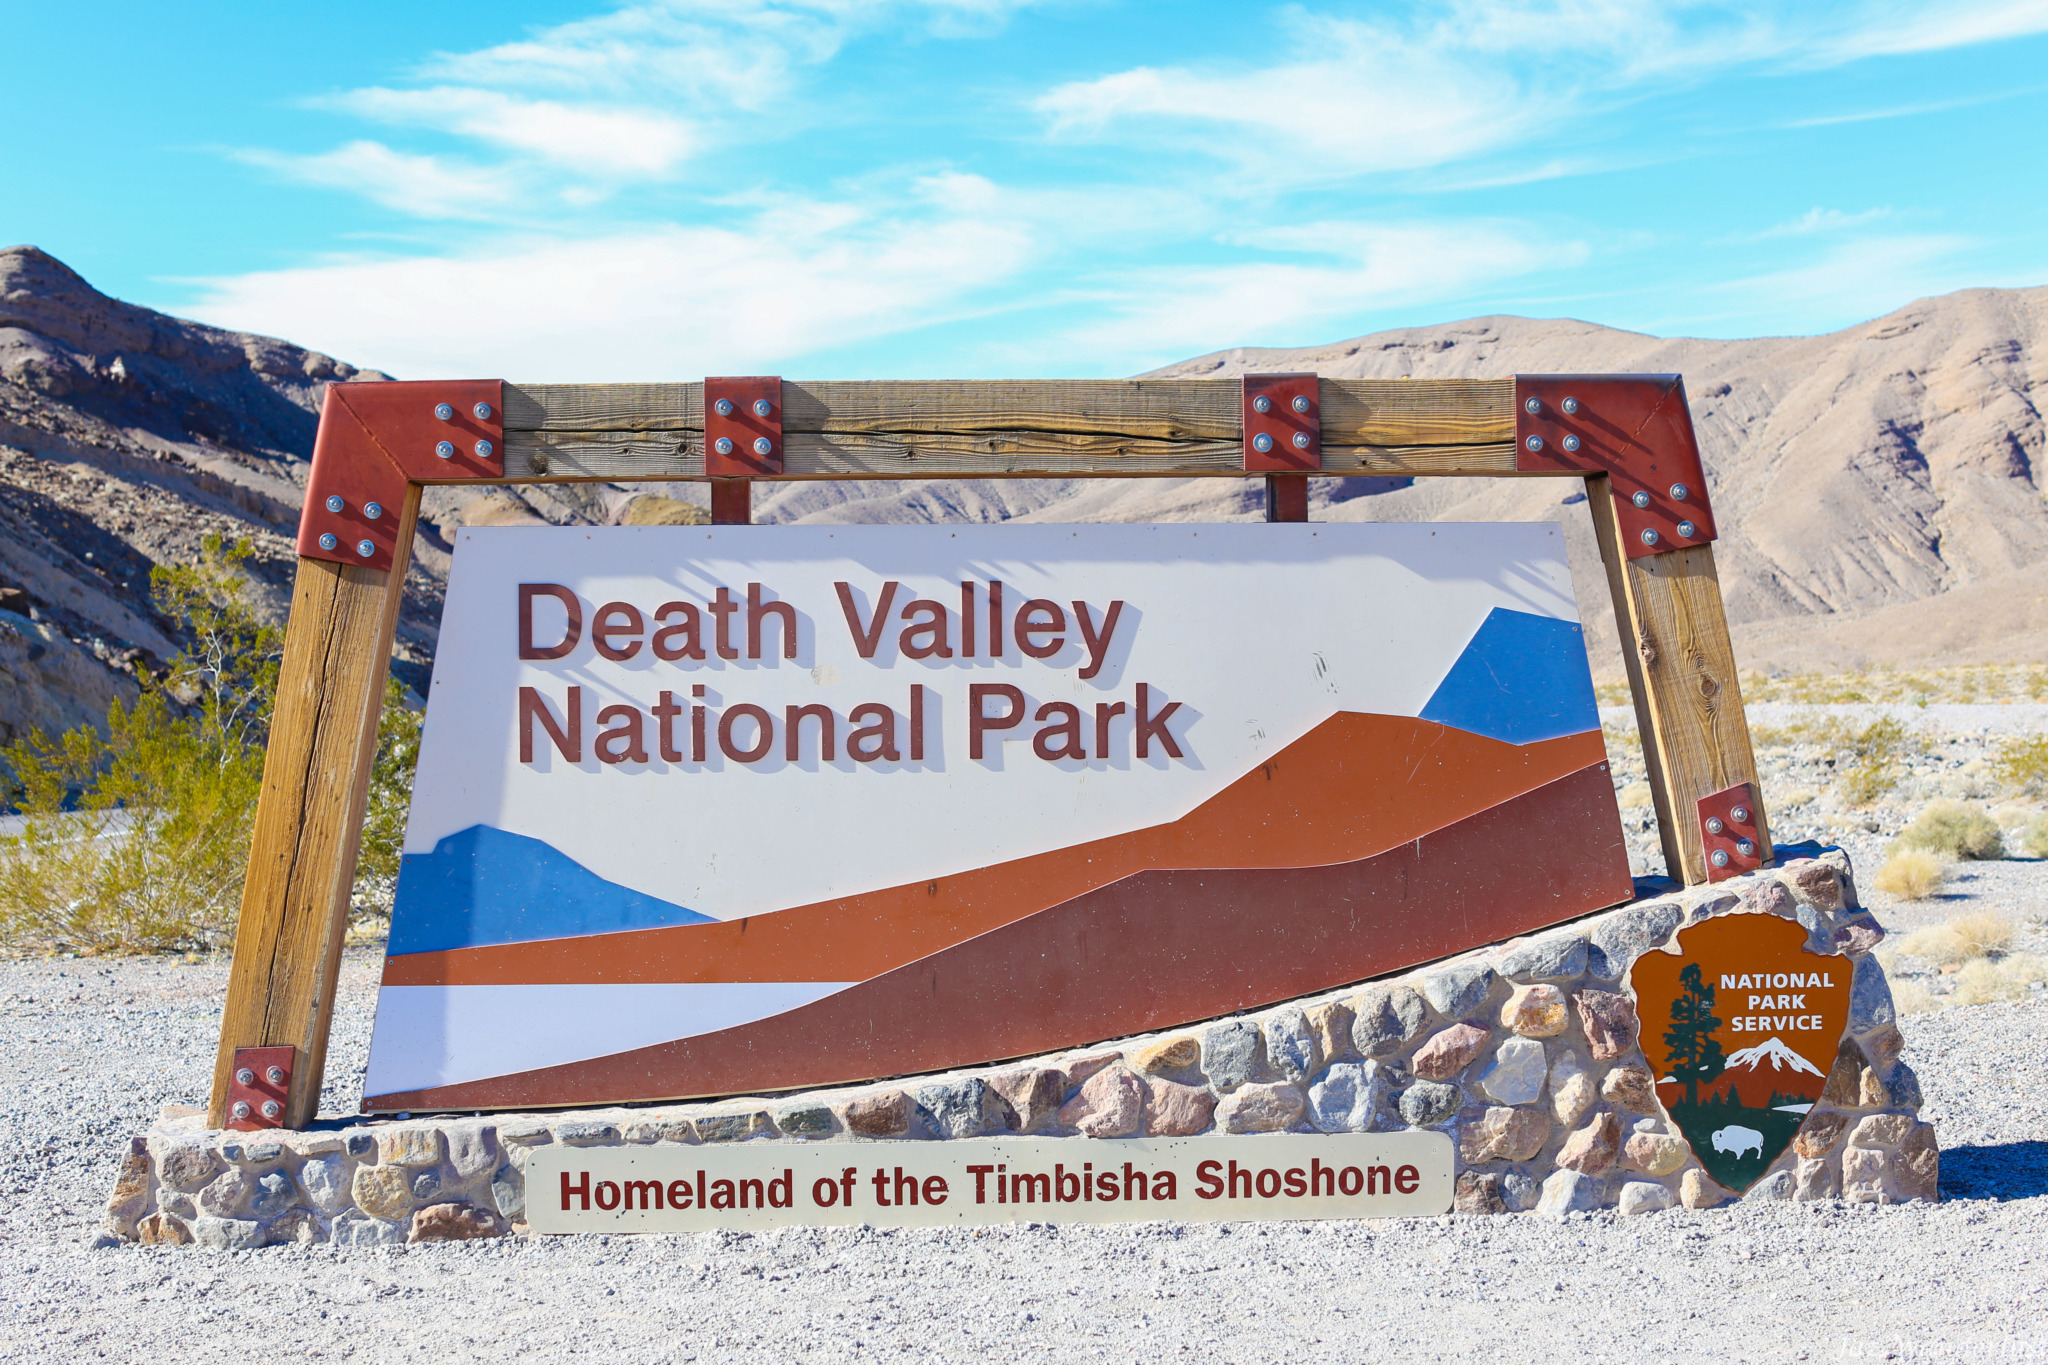 Death Valley National Park welcome sign. Photography by Jaz Wanderlust.